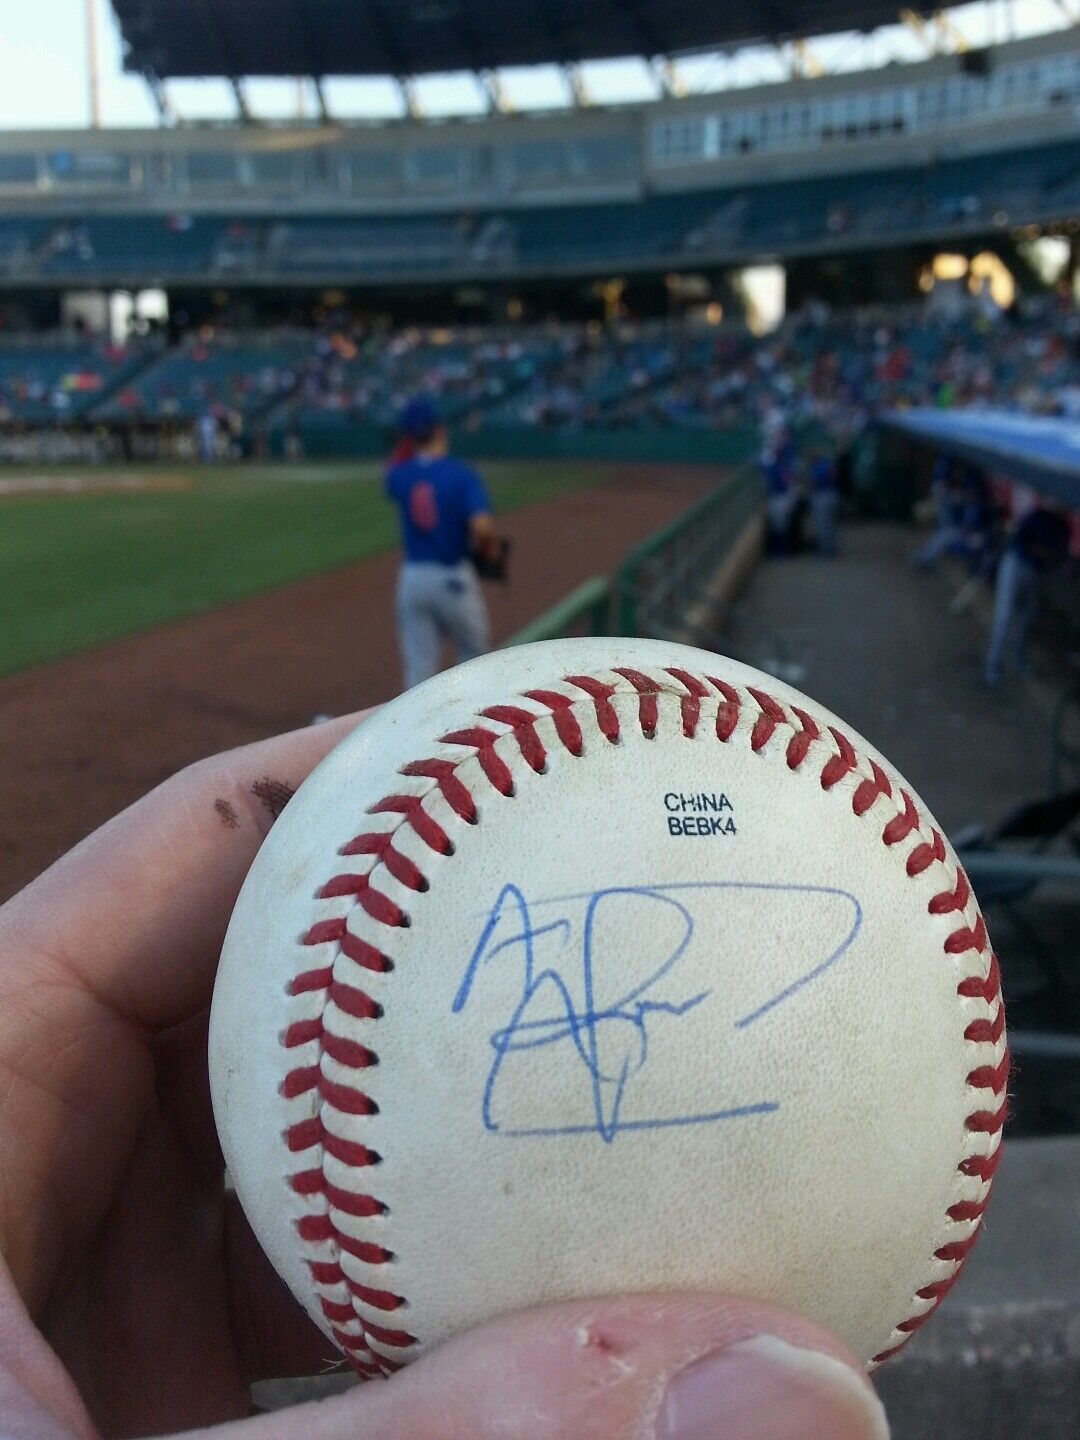 ALBERT ALMORA IOWA CHICAGO CUBS AUTO PCL GAME USED BASEBALL OBTAINED 4/22/16